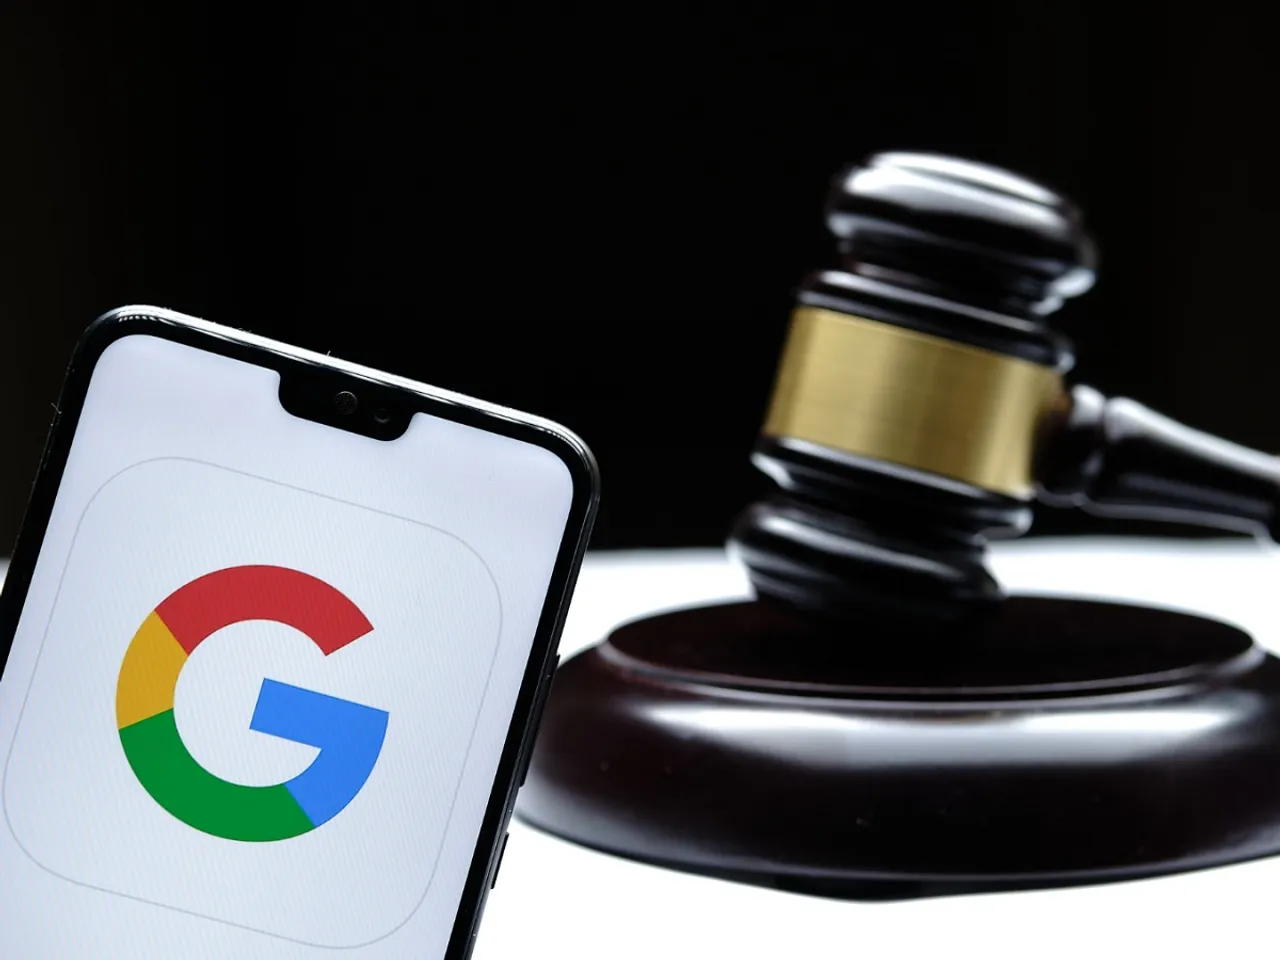 Android mobile device case: SC to hear pleas of Google, CCI on Oct 10